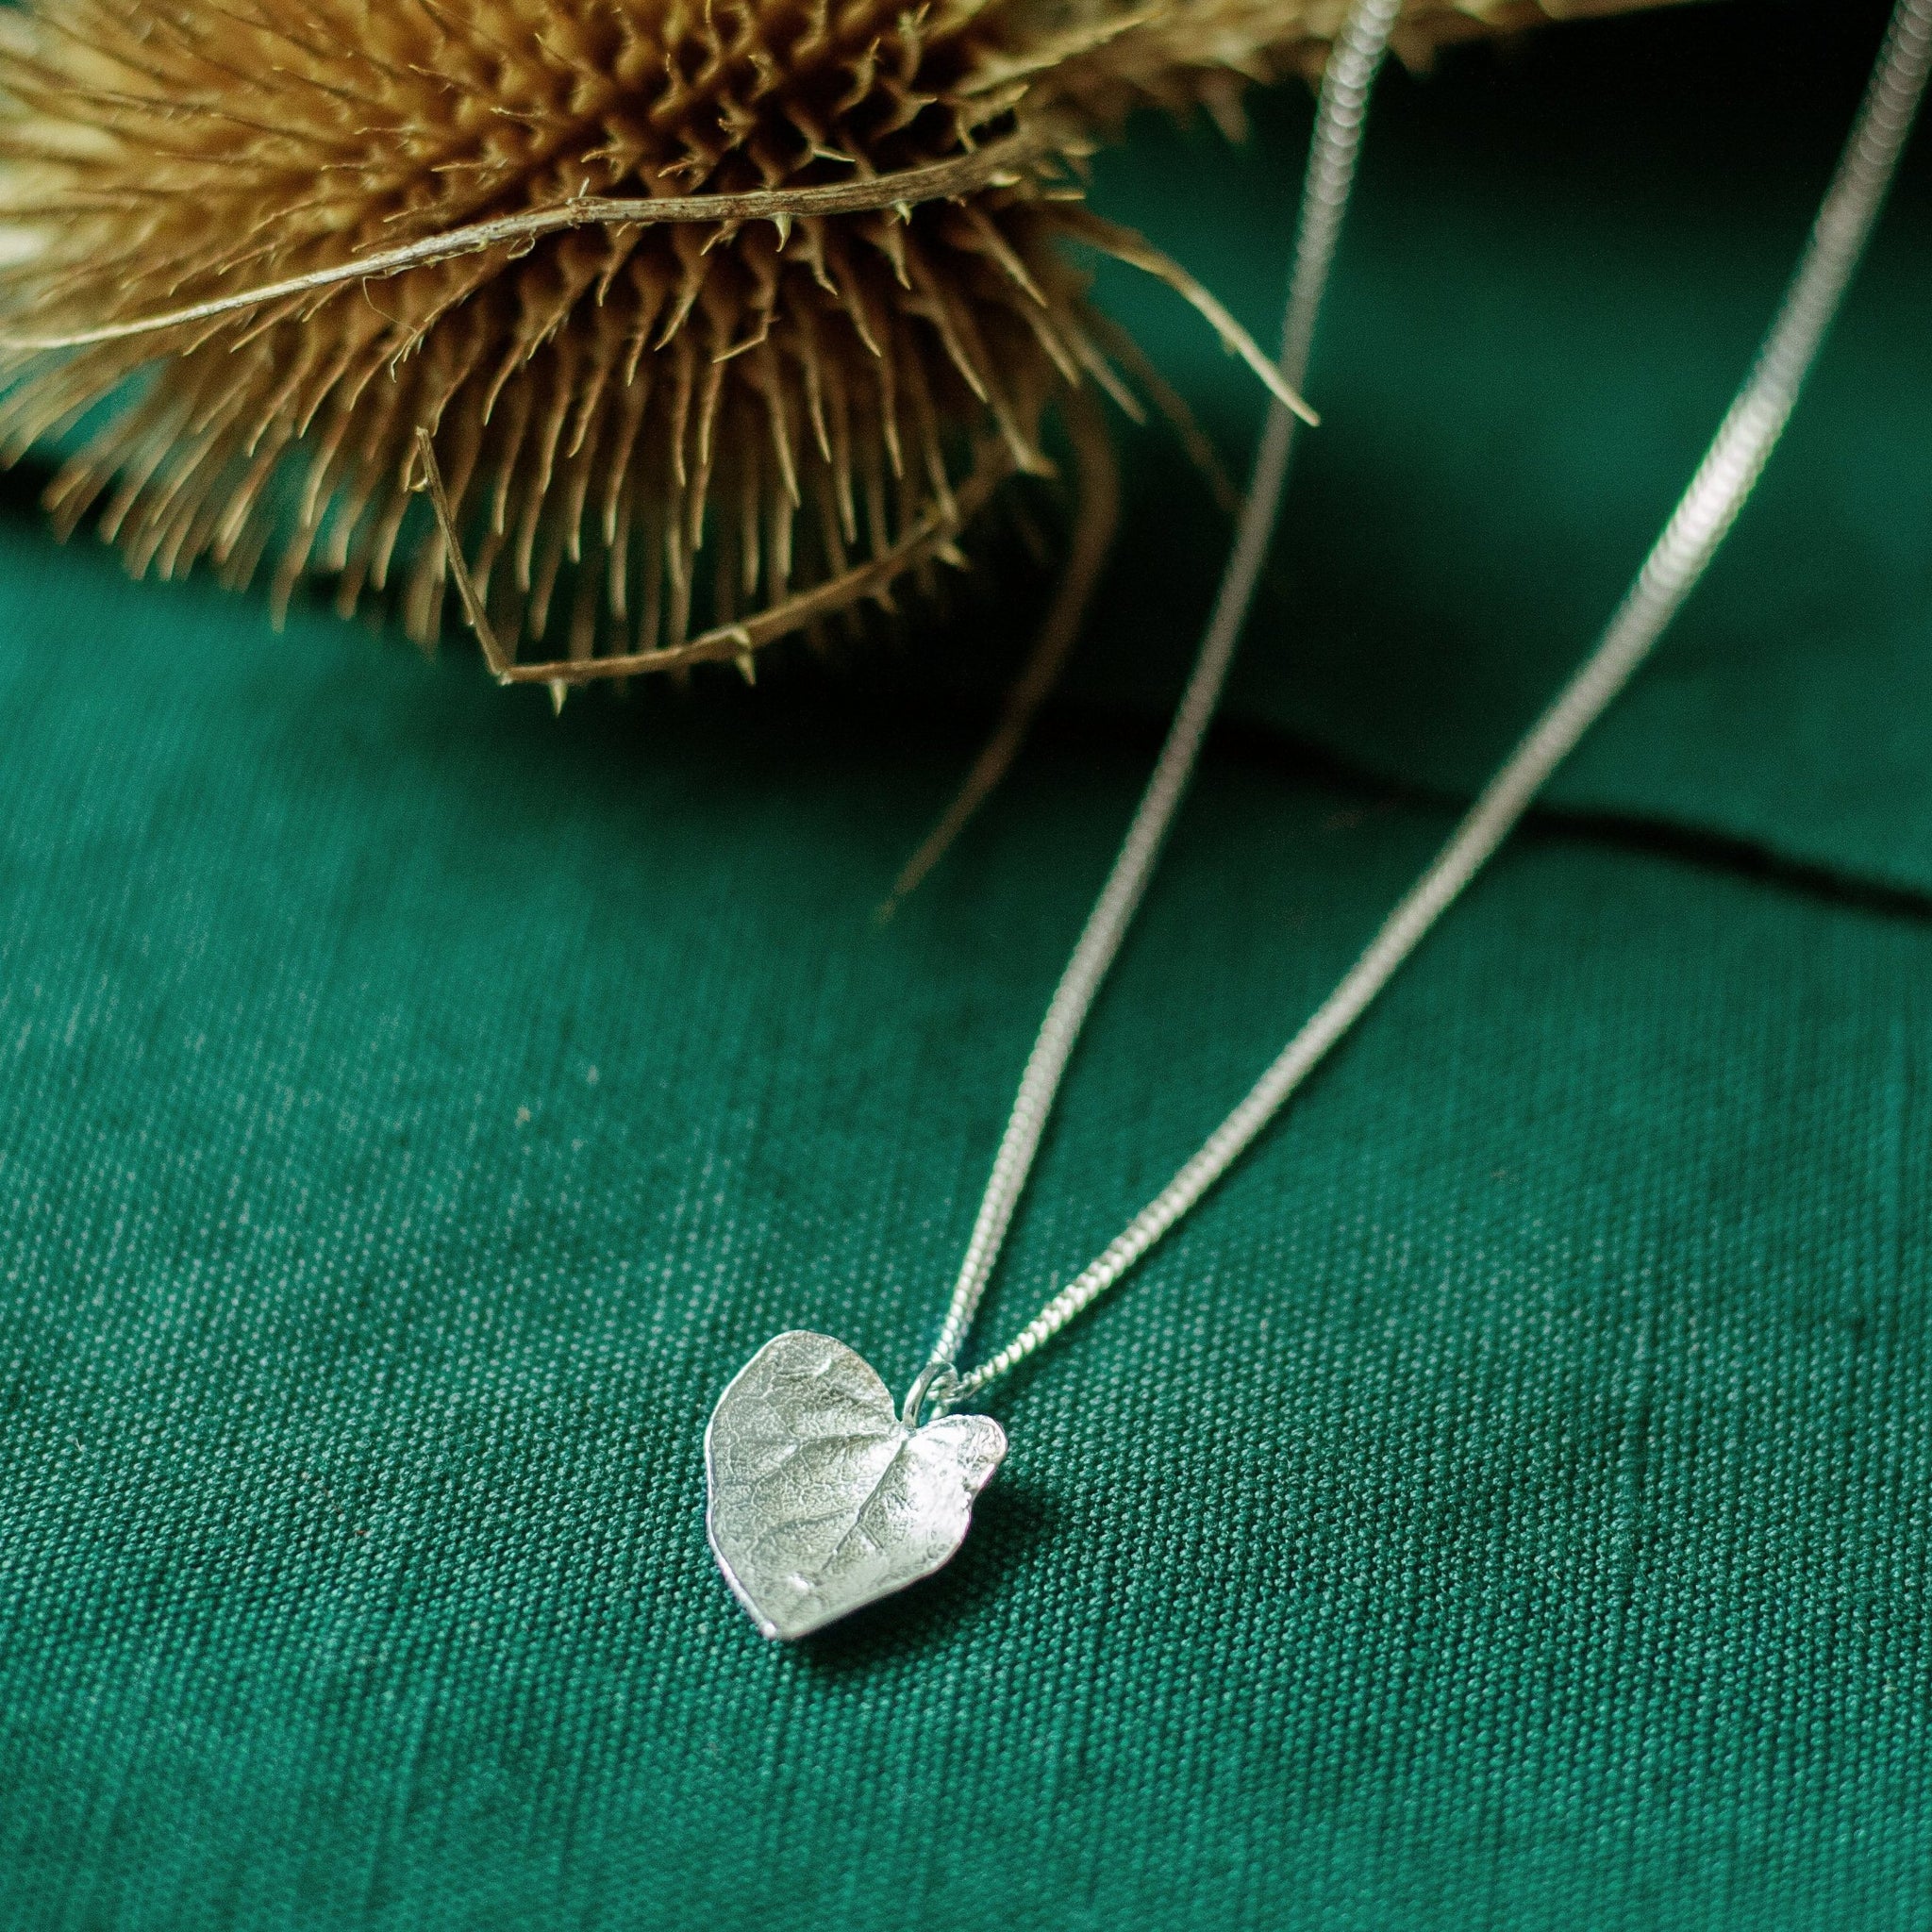 silver ivy leaf necklace on green background with dried flower